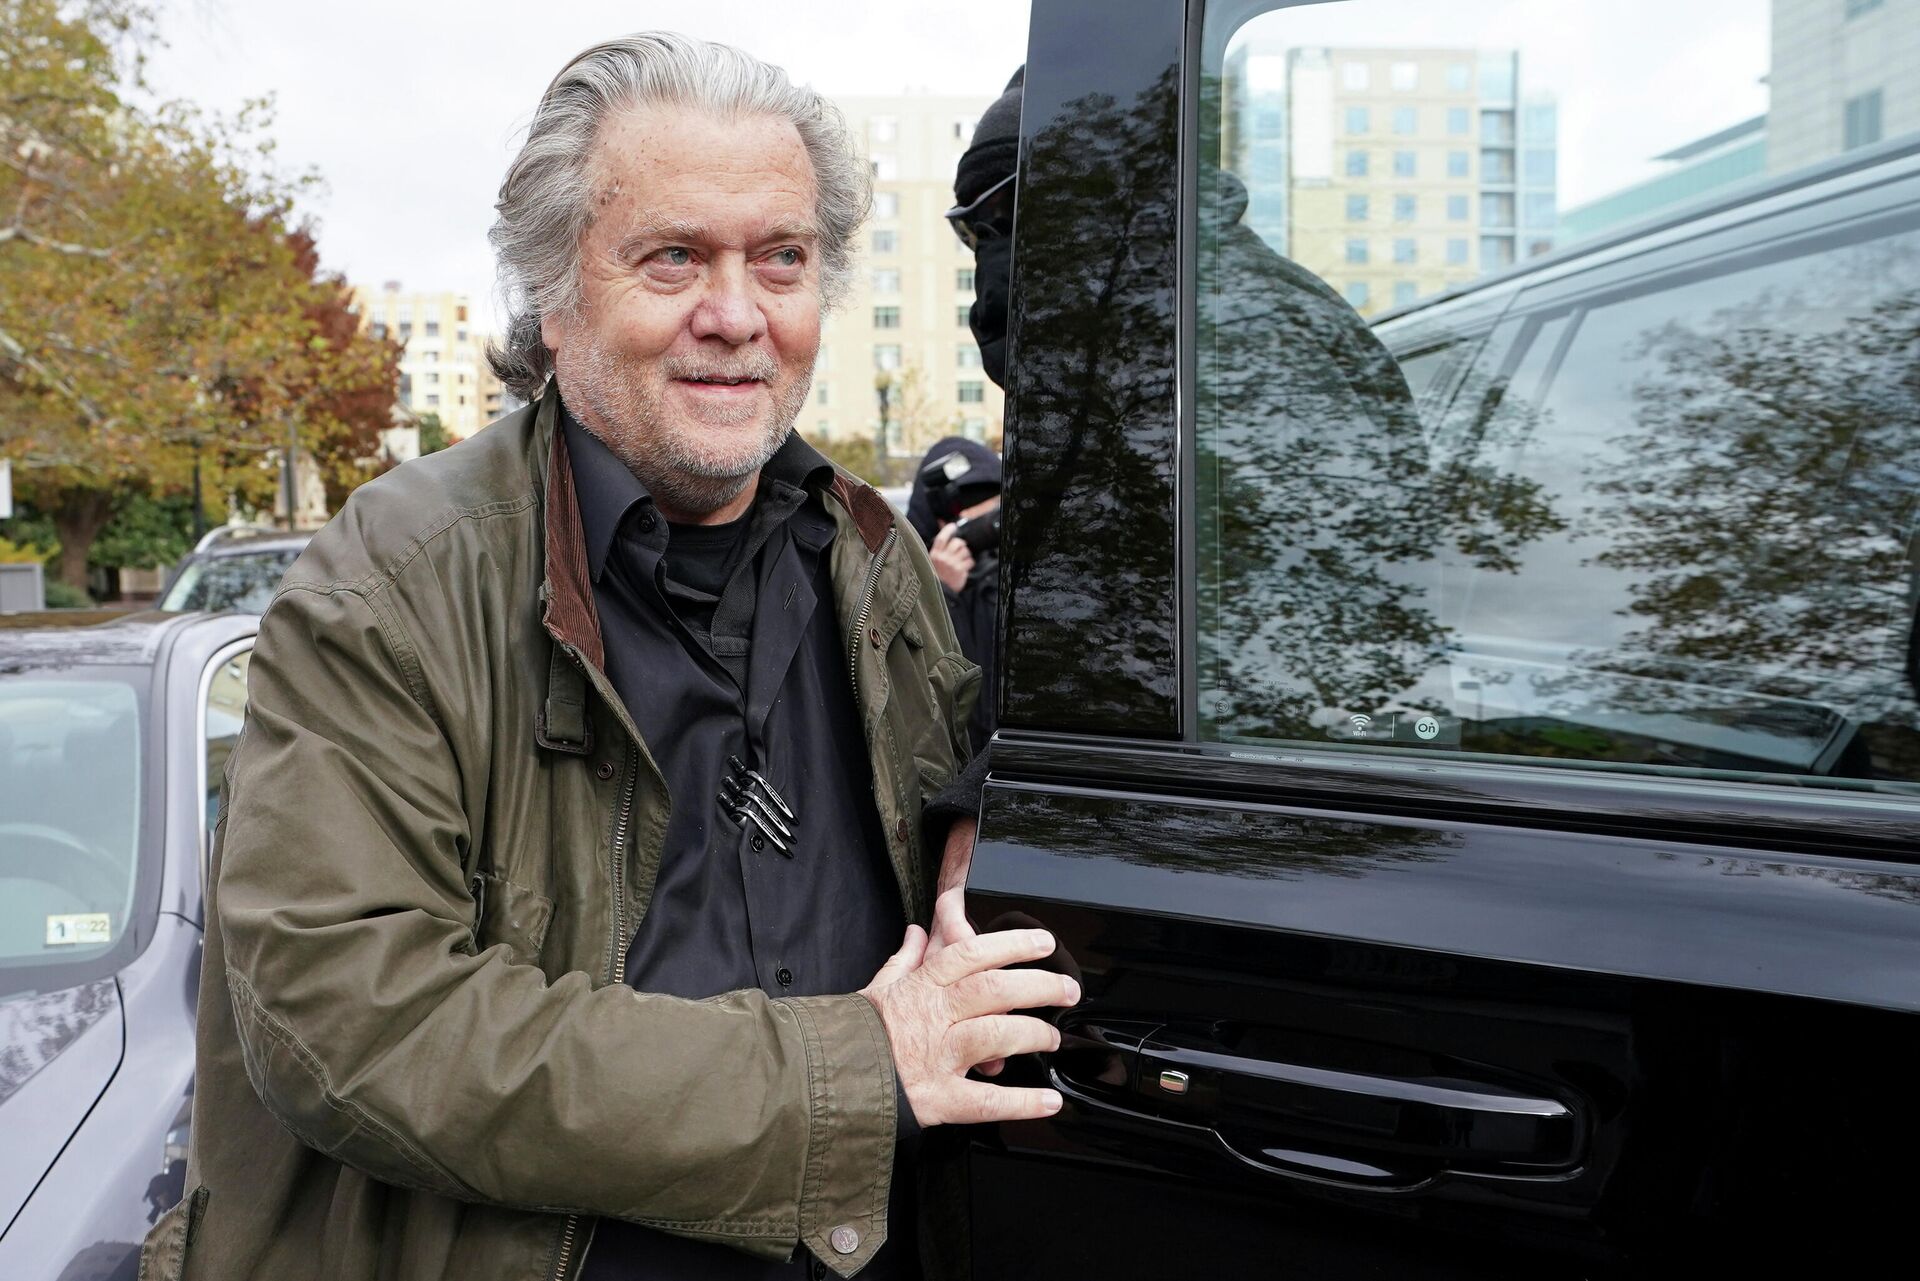 Steve Bannon, talk show host and former White House advisor to former President Donald Trump, arrives at the FBI's Washington field office to turn himself in to federal authorities after being indicted for refusal to comply with a congressional subpoena over the January 6 attacks on the U.S. Capitol in Washington, U.S., November 15, 2021.  - Sputnik International, 1920, 15.11.2021